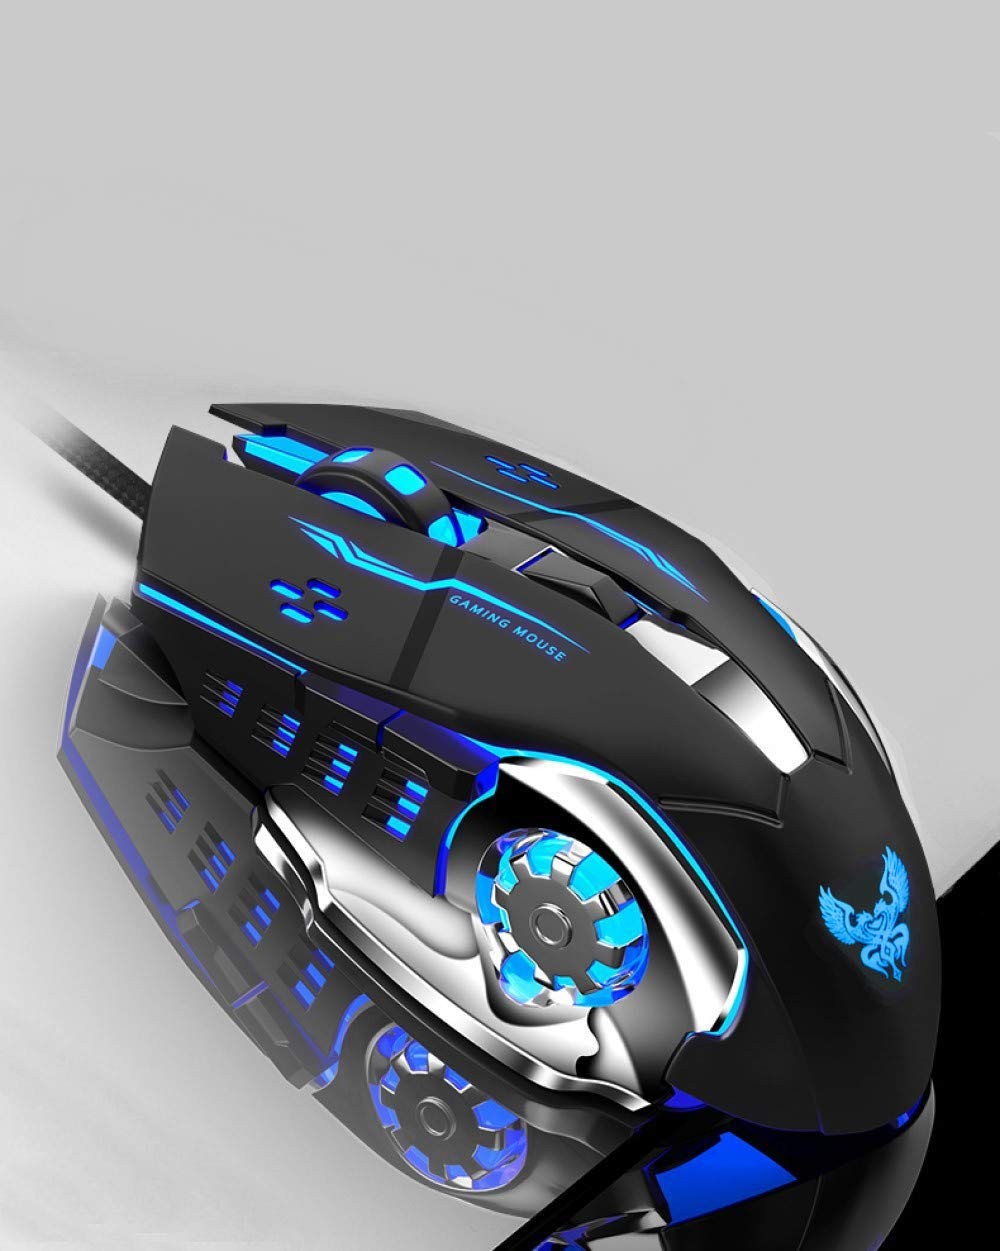 X1 Gaming Mouse 4800 DPI 6 Buttons With LED Lightings